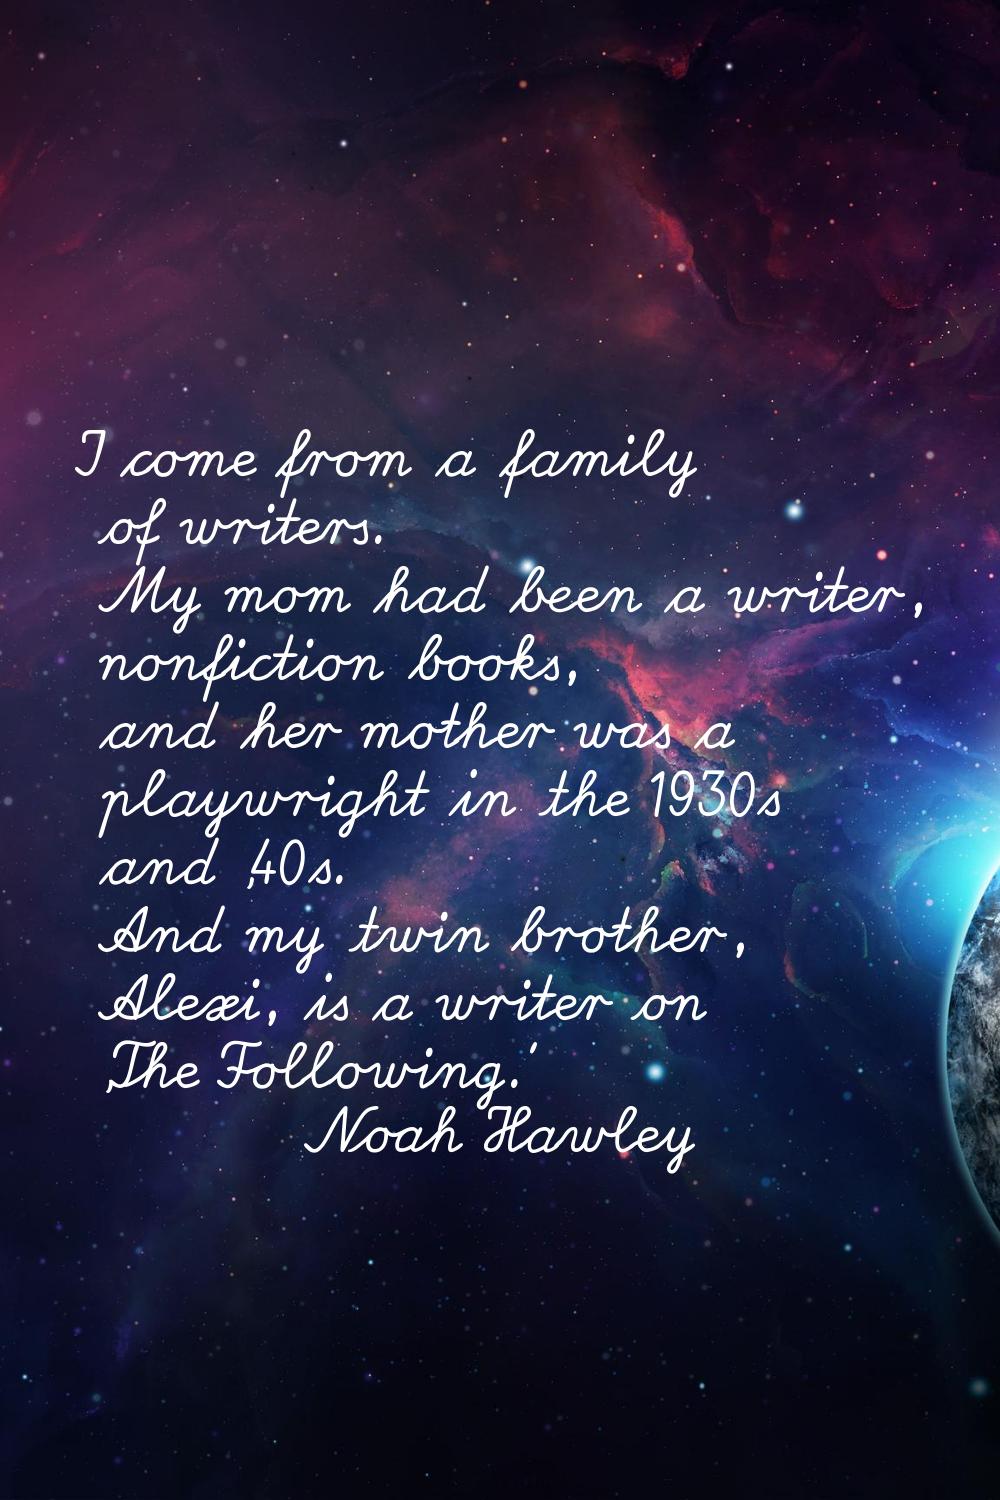 I come from a family of writers. My mom had been a writer, nonfiction books, and her mother was a p